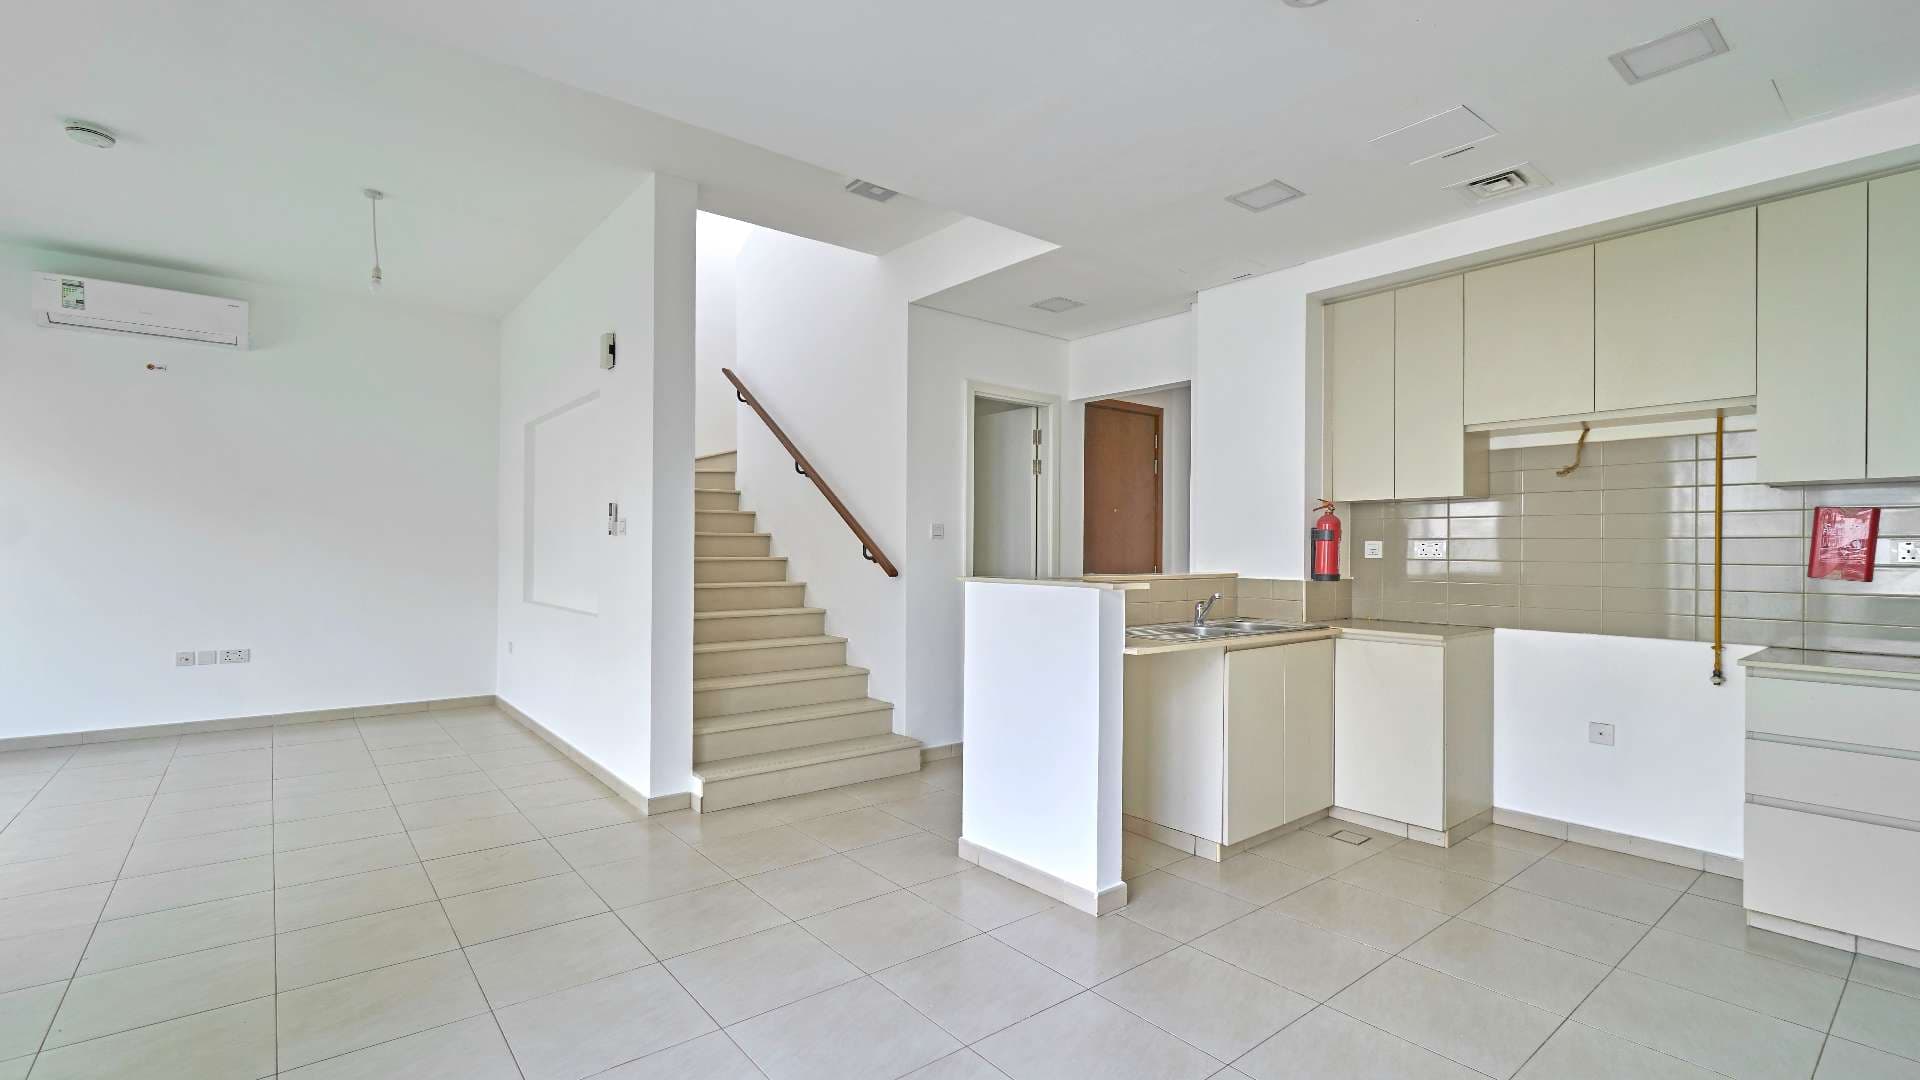 3 Bedroom Townhouse For Sale Zahra Townhouses Lp09037 923466b6800f680.jpg